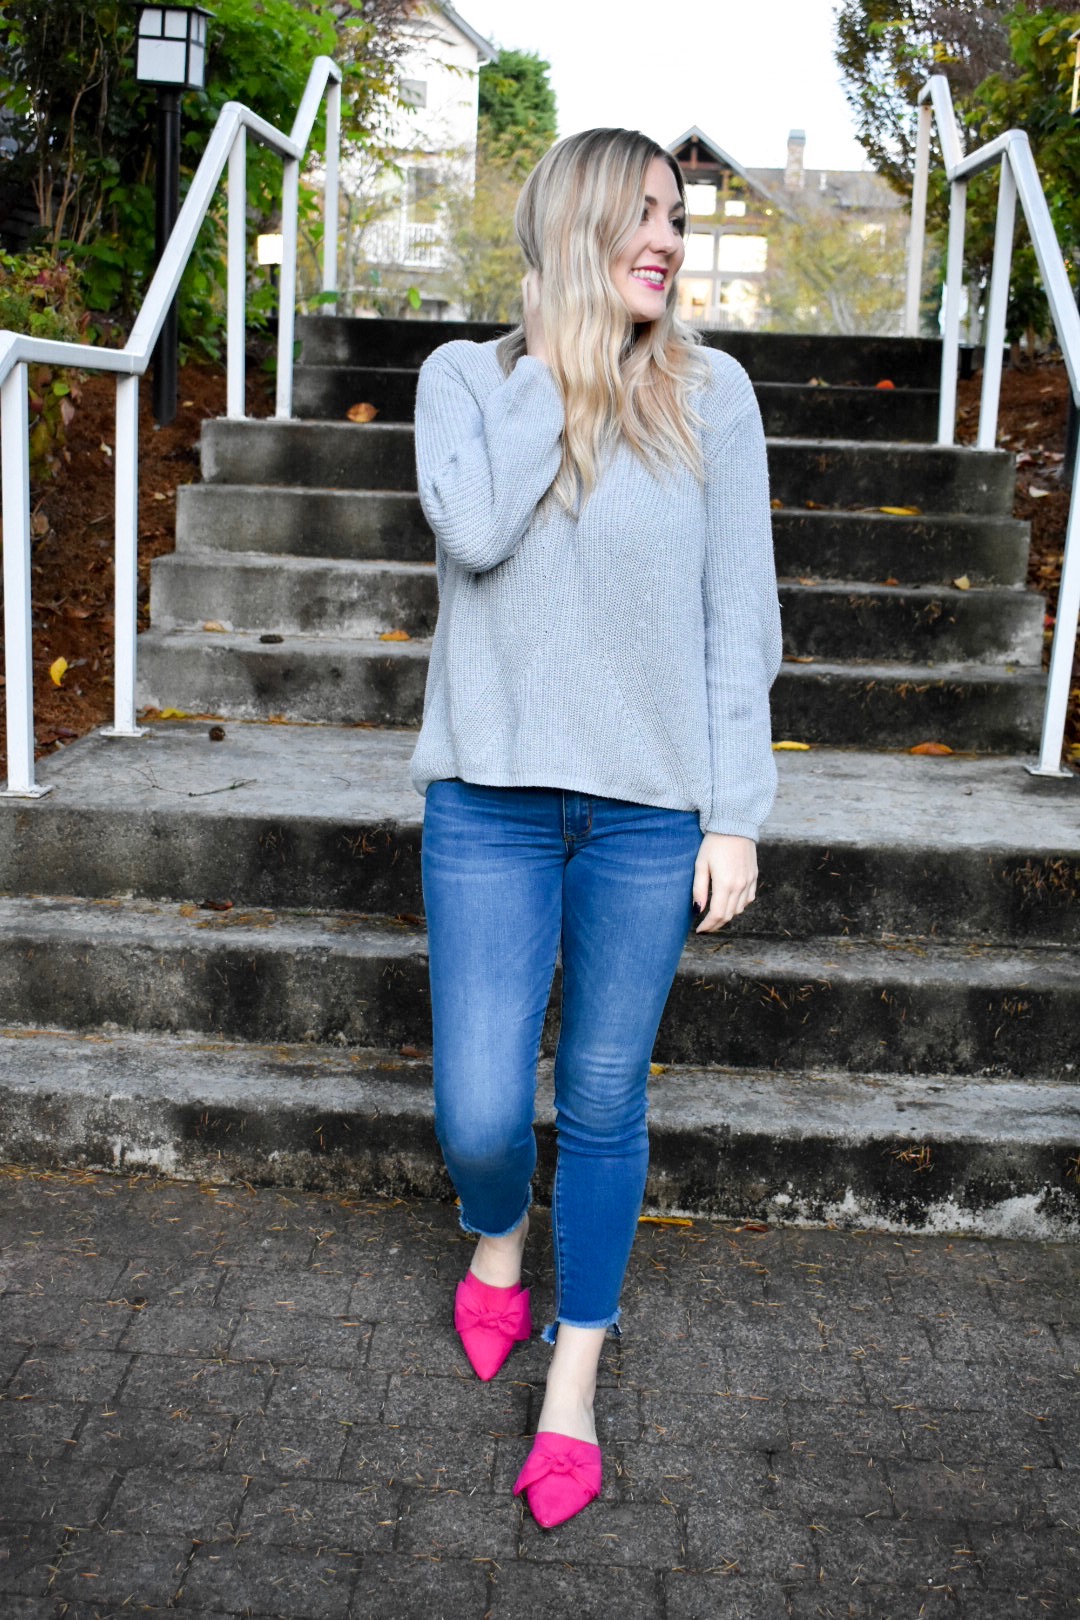 Cozy chic fall outfit!